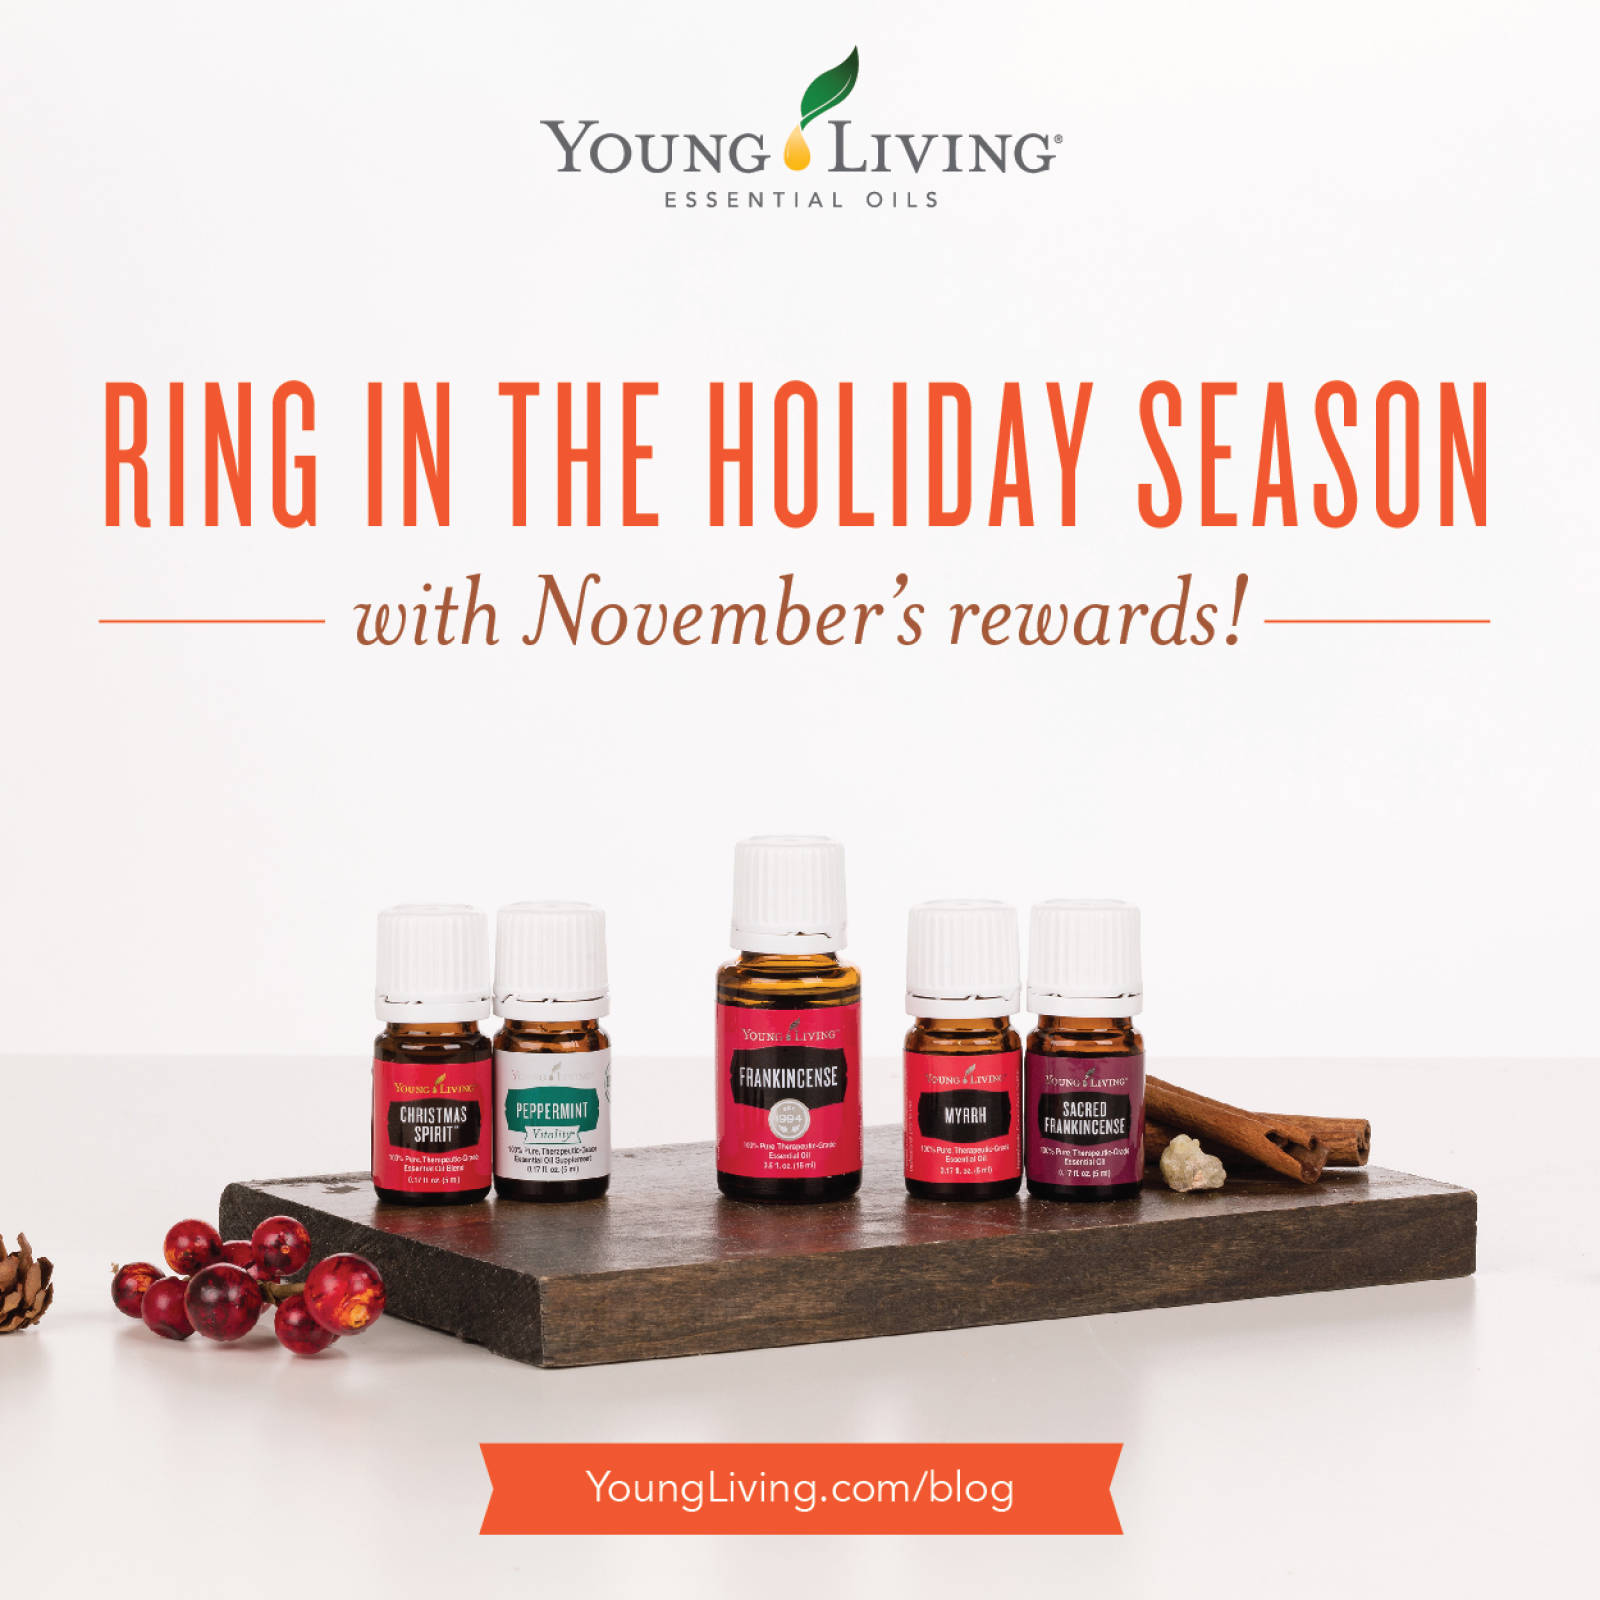 November Promotions and More